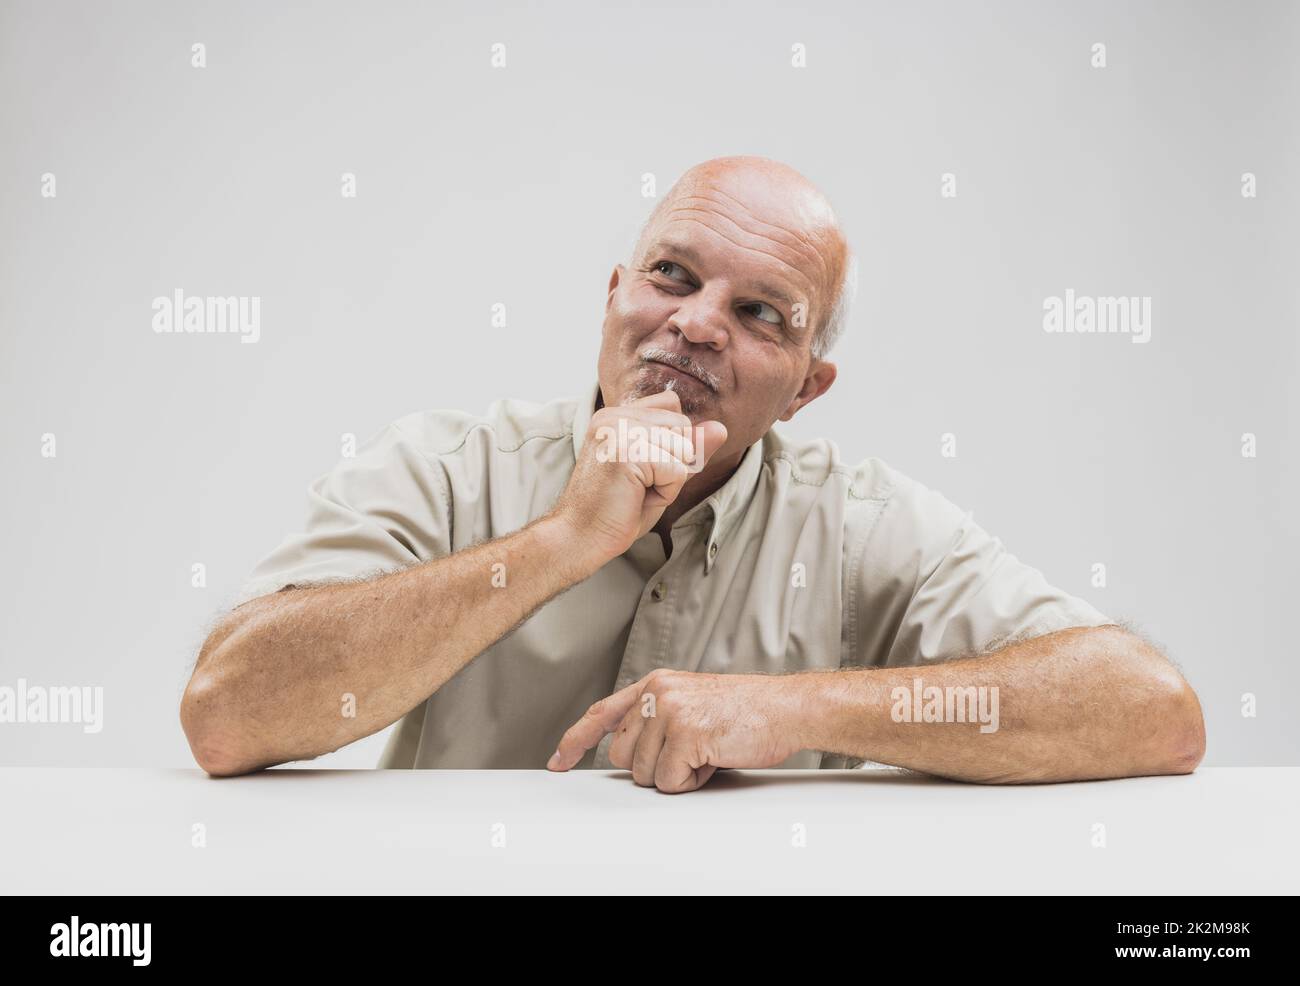 Pleased man sitting thinking with a smile Stock Photo